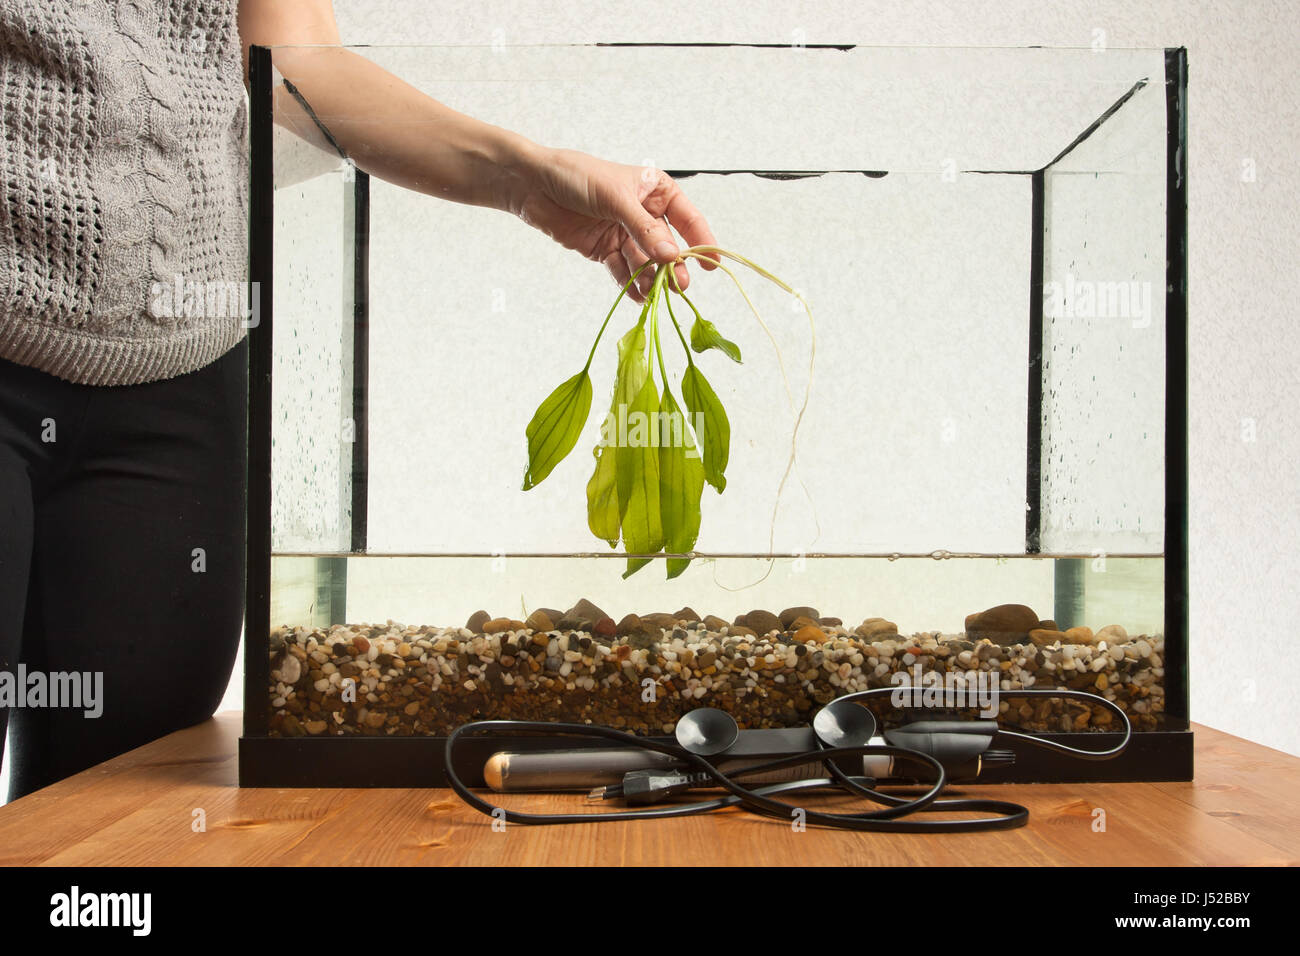 hand of woman holding water plant ready to planting in aquarium Stock Photo